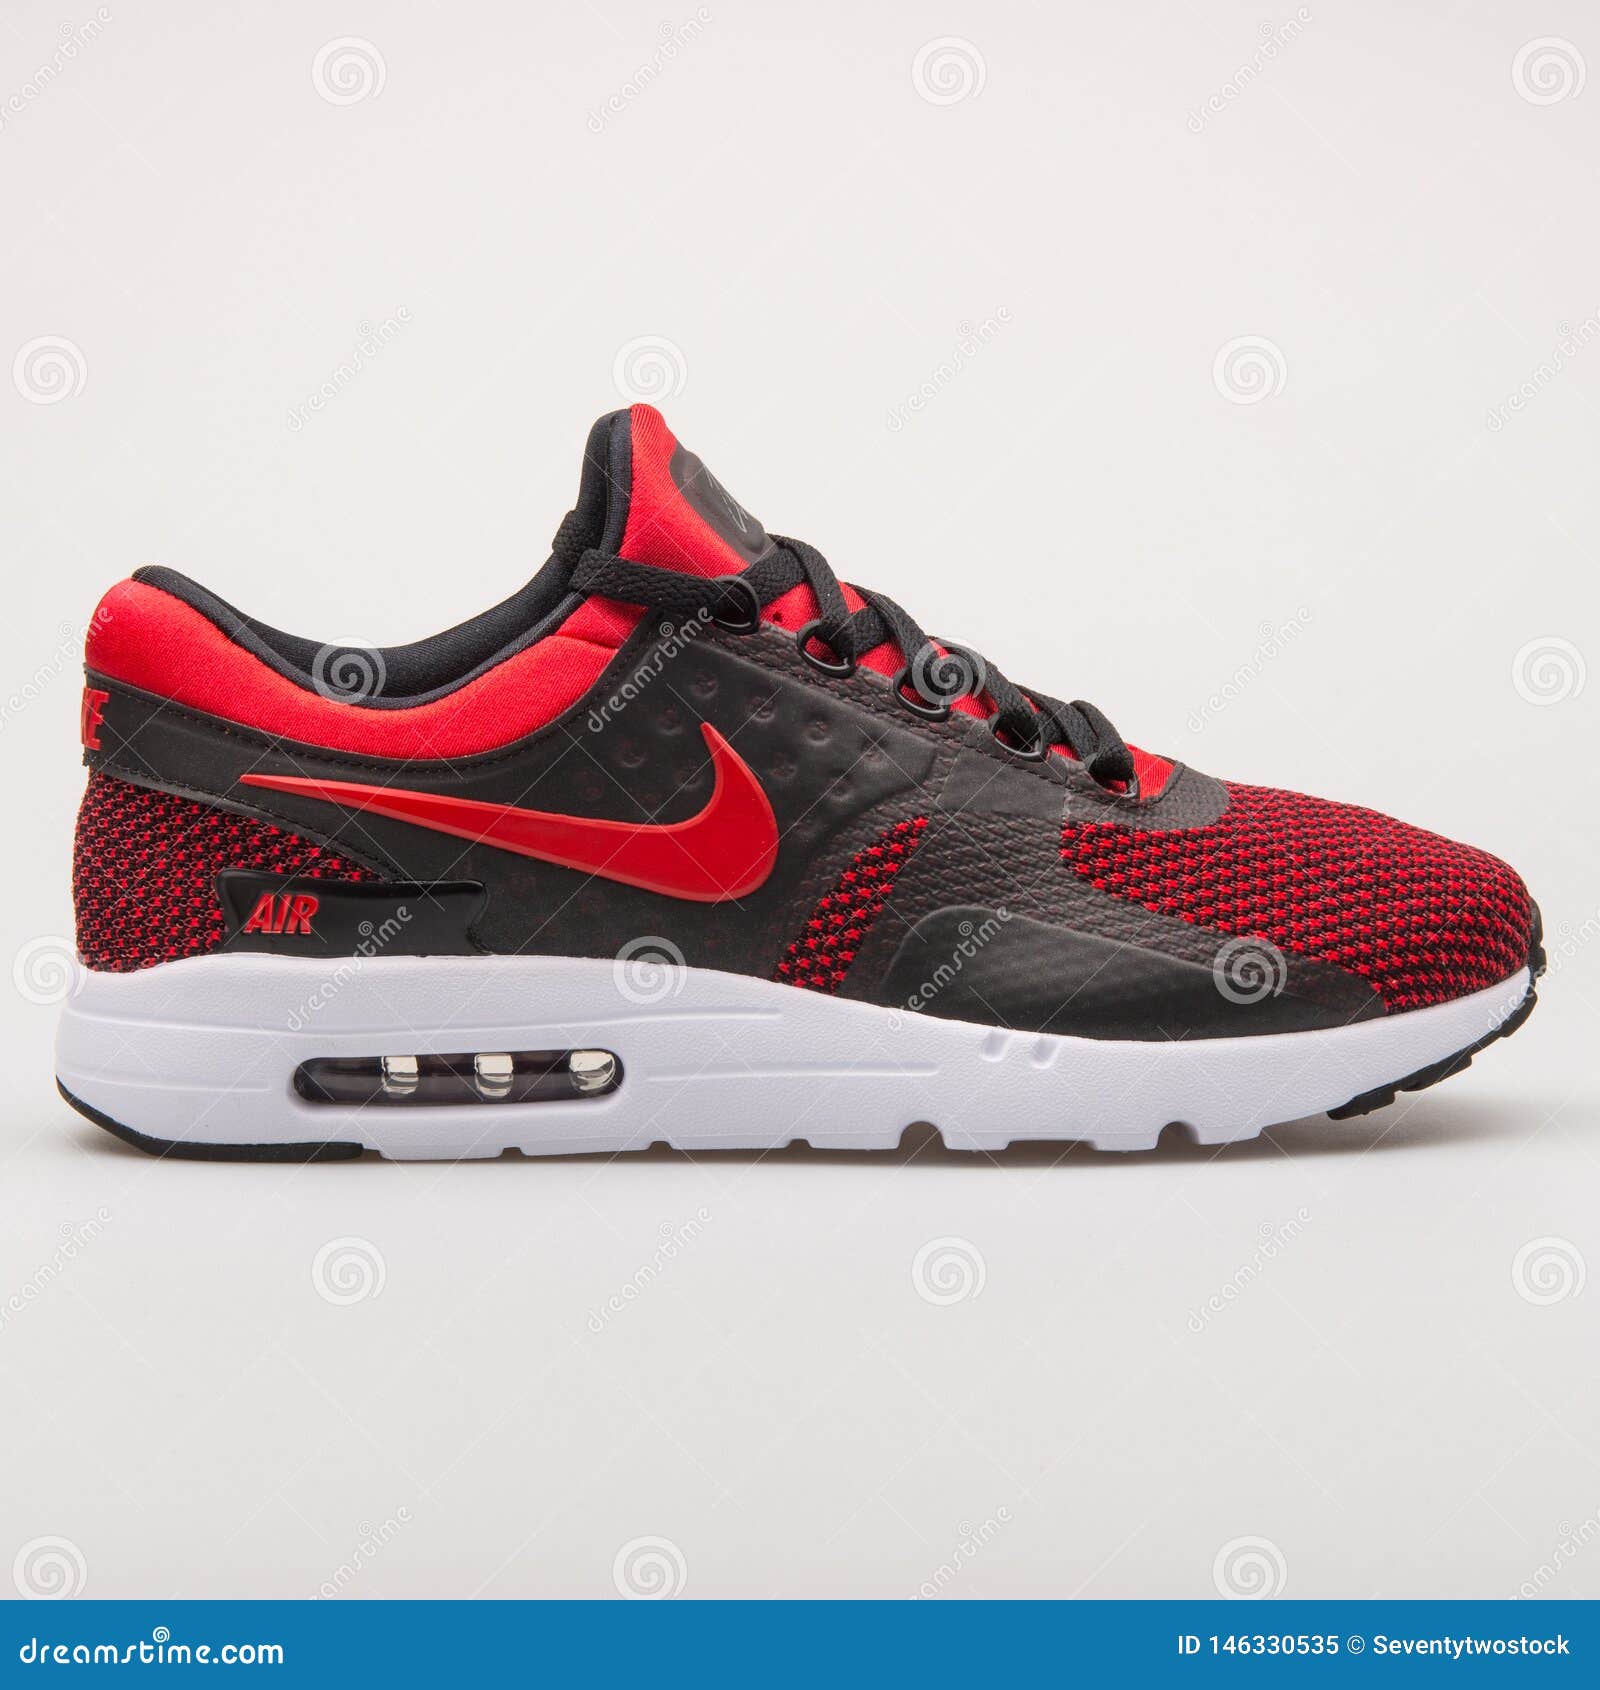 Nike Air Max Zero Black Red Sneaker Editorial Image - Image of activity, object: 146330535